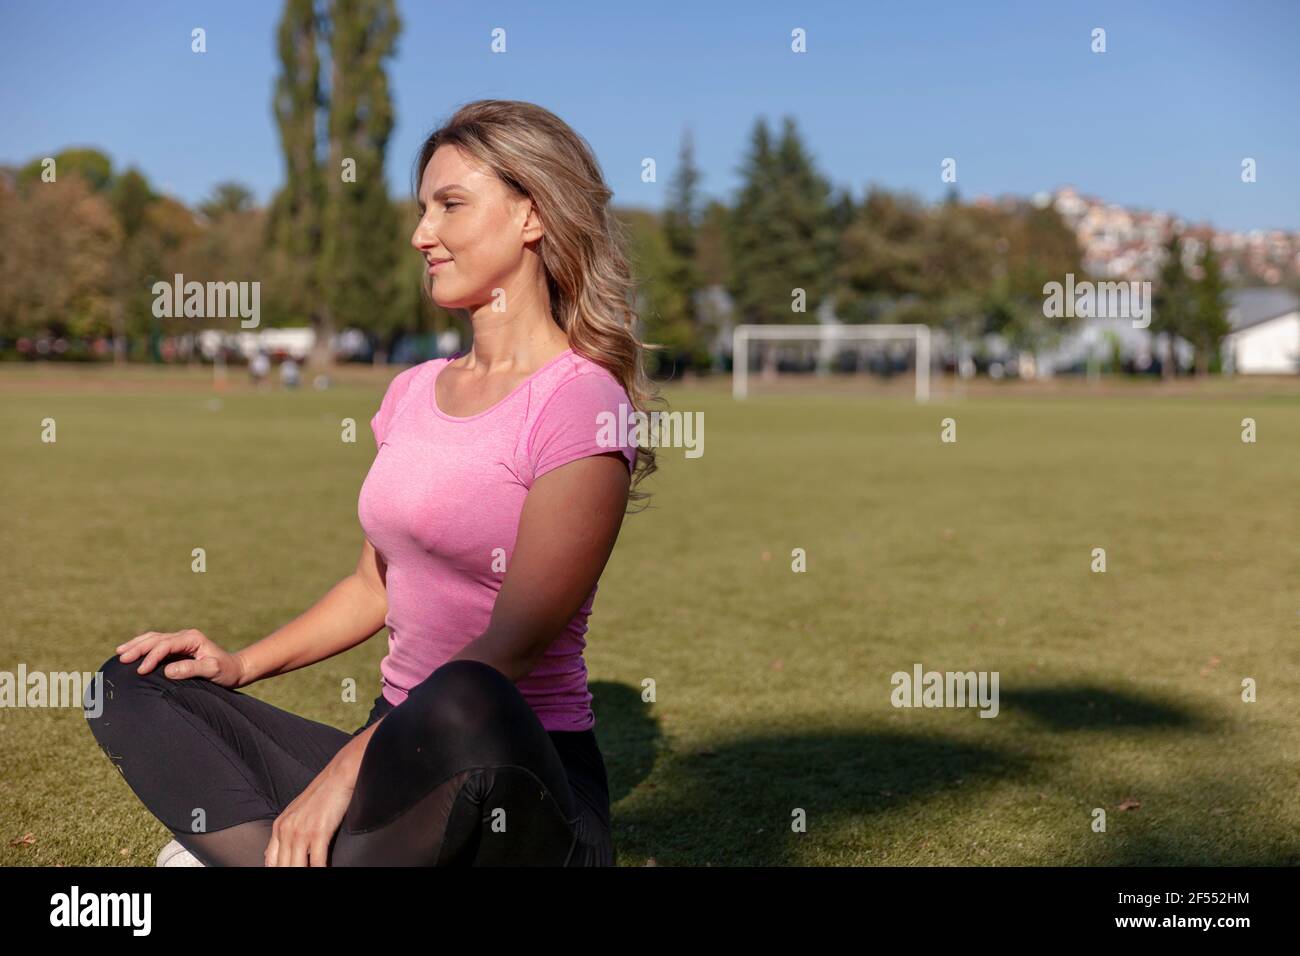 A beautiful 35-year-old woman photographed up close in sports equipment Stock Photo